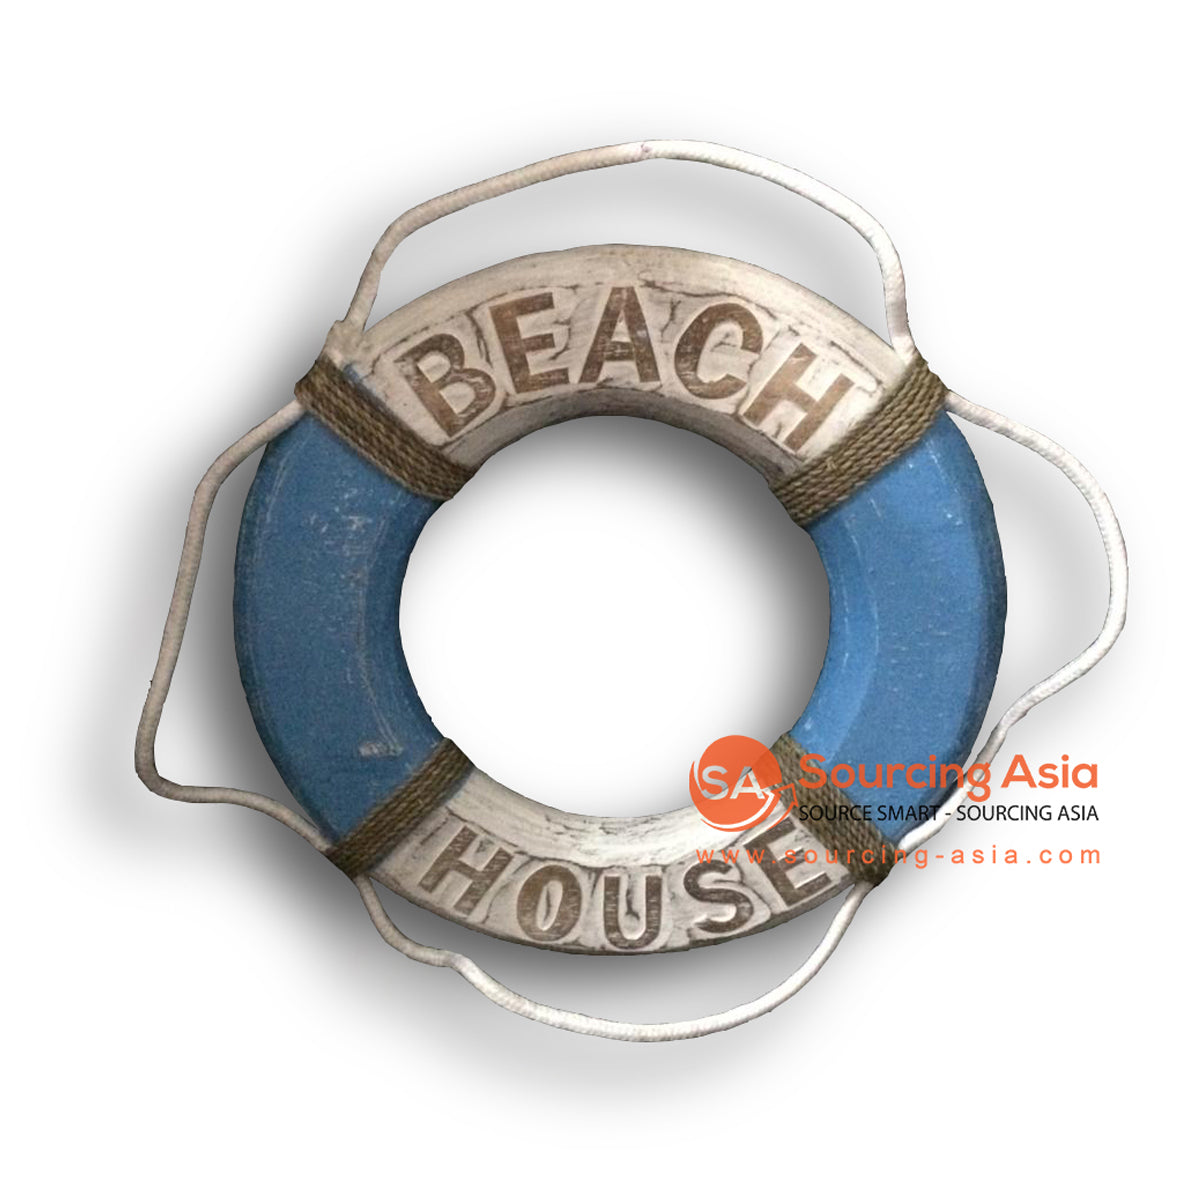 MTIB001-2 BLUE WOODEN BUOY RING WALL DECORATION WITH "BEACH HOUSE" SIGN